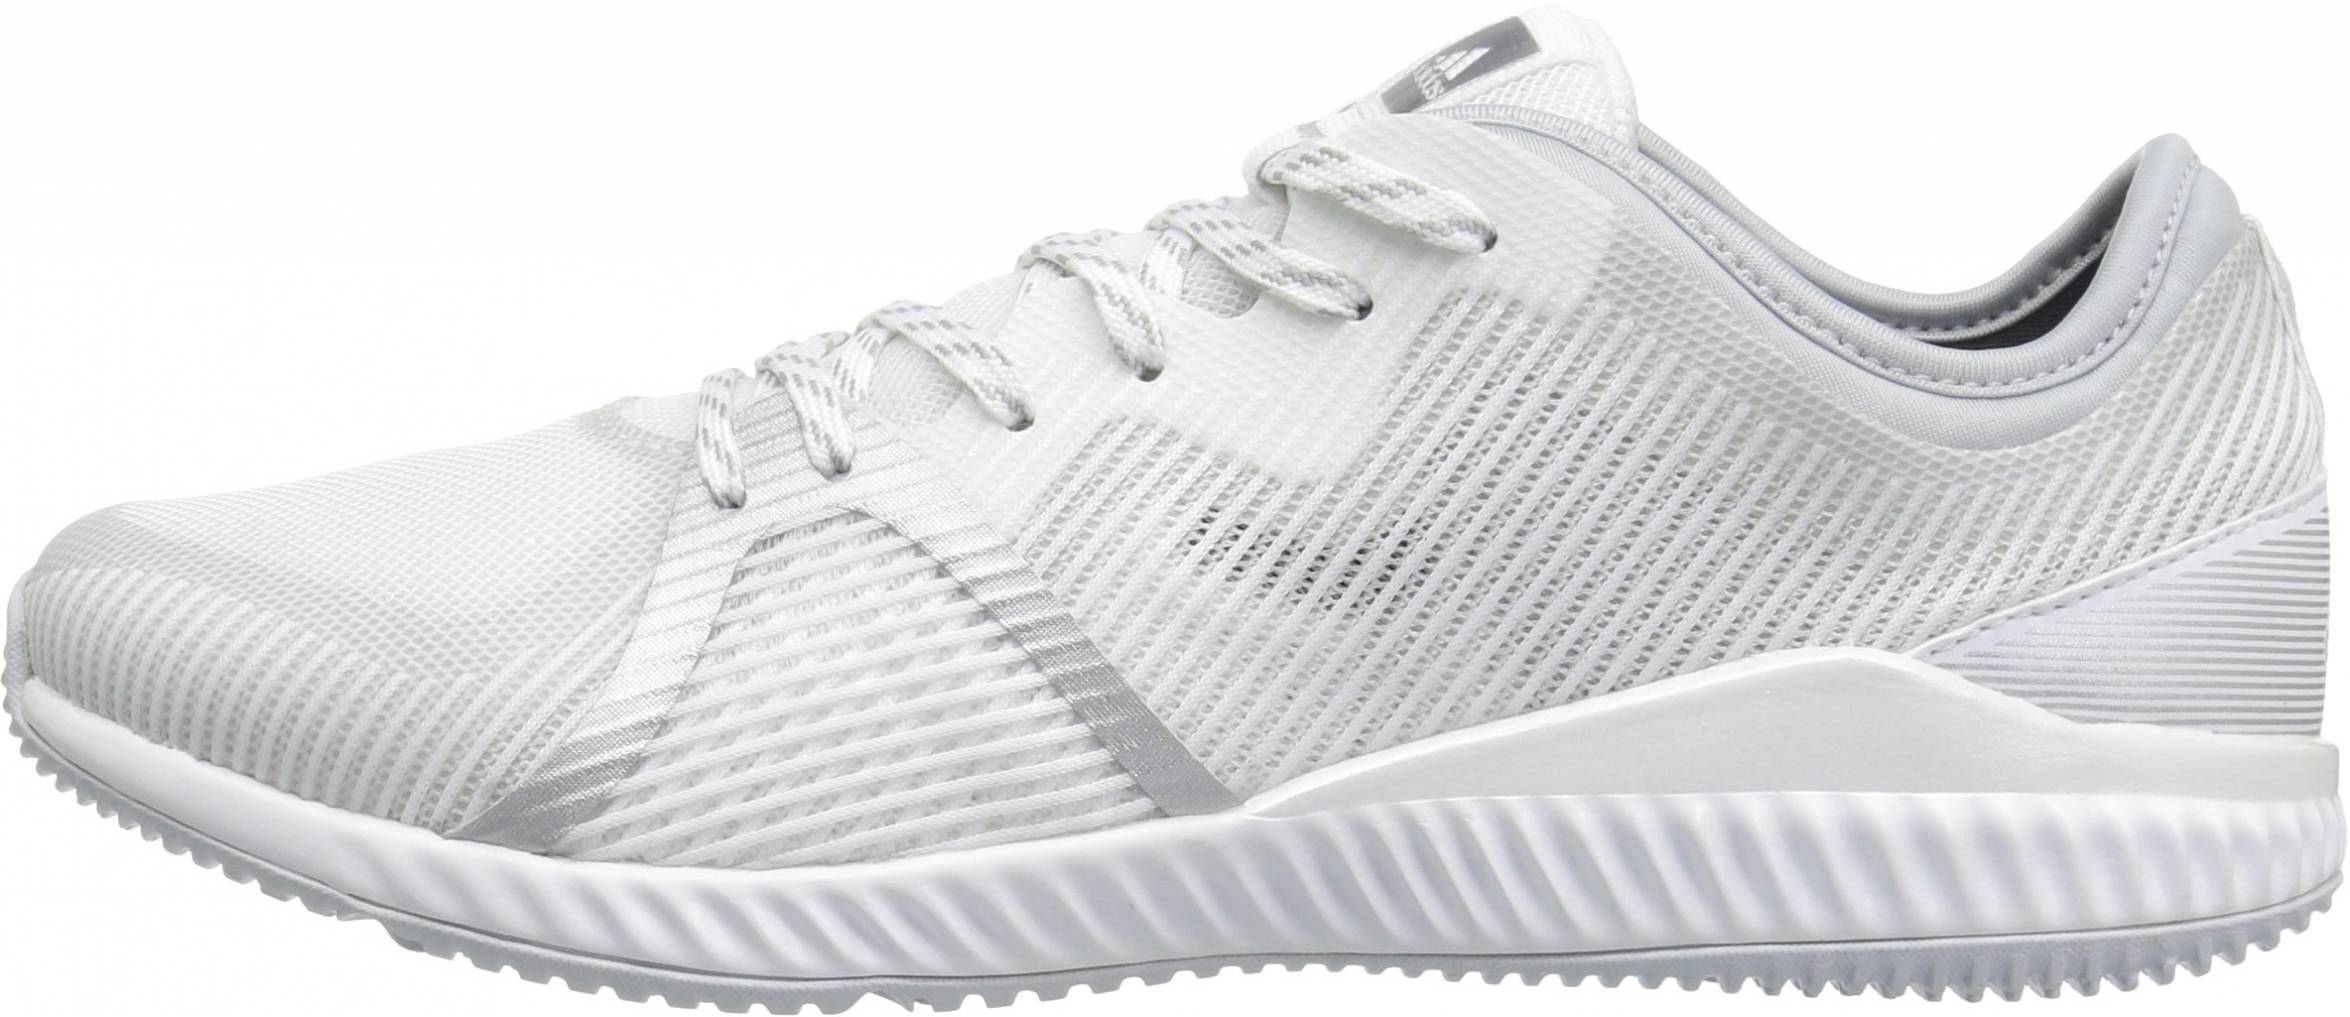 Save 50% on Adidas Workout Shoes (17 